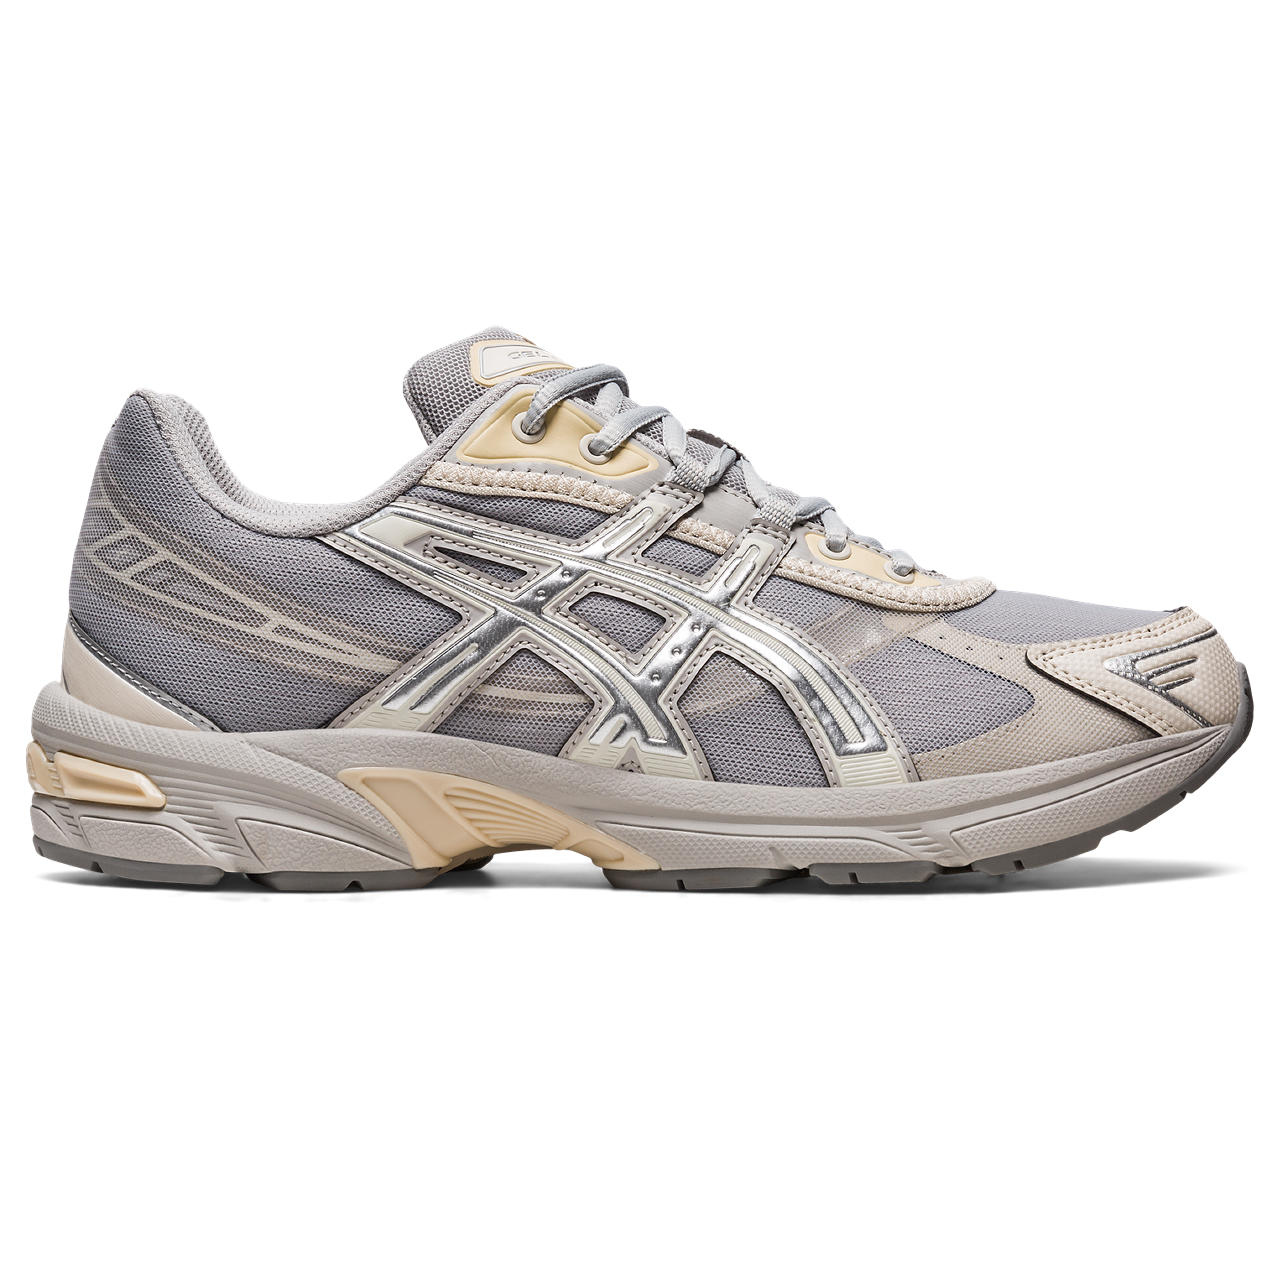 ASICS GEL-1130 RE, OYSTER GREY/PURE SILVER, swatch